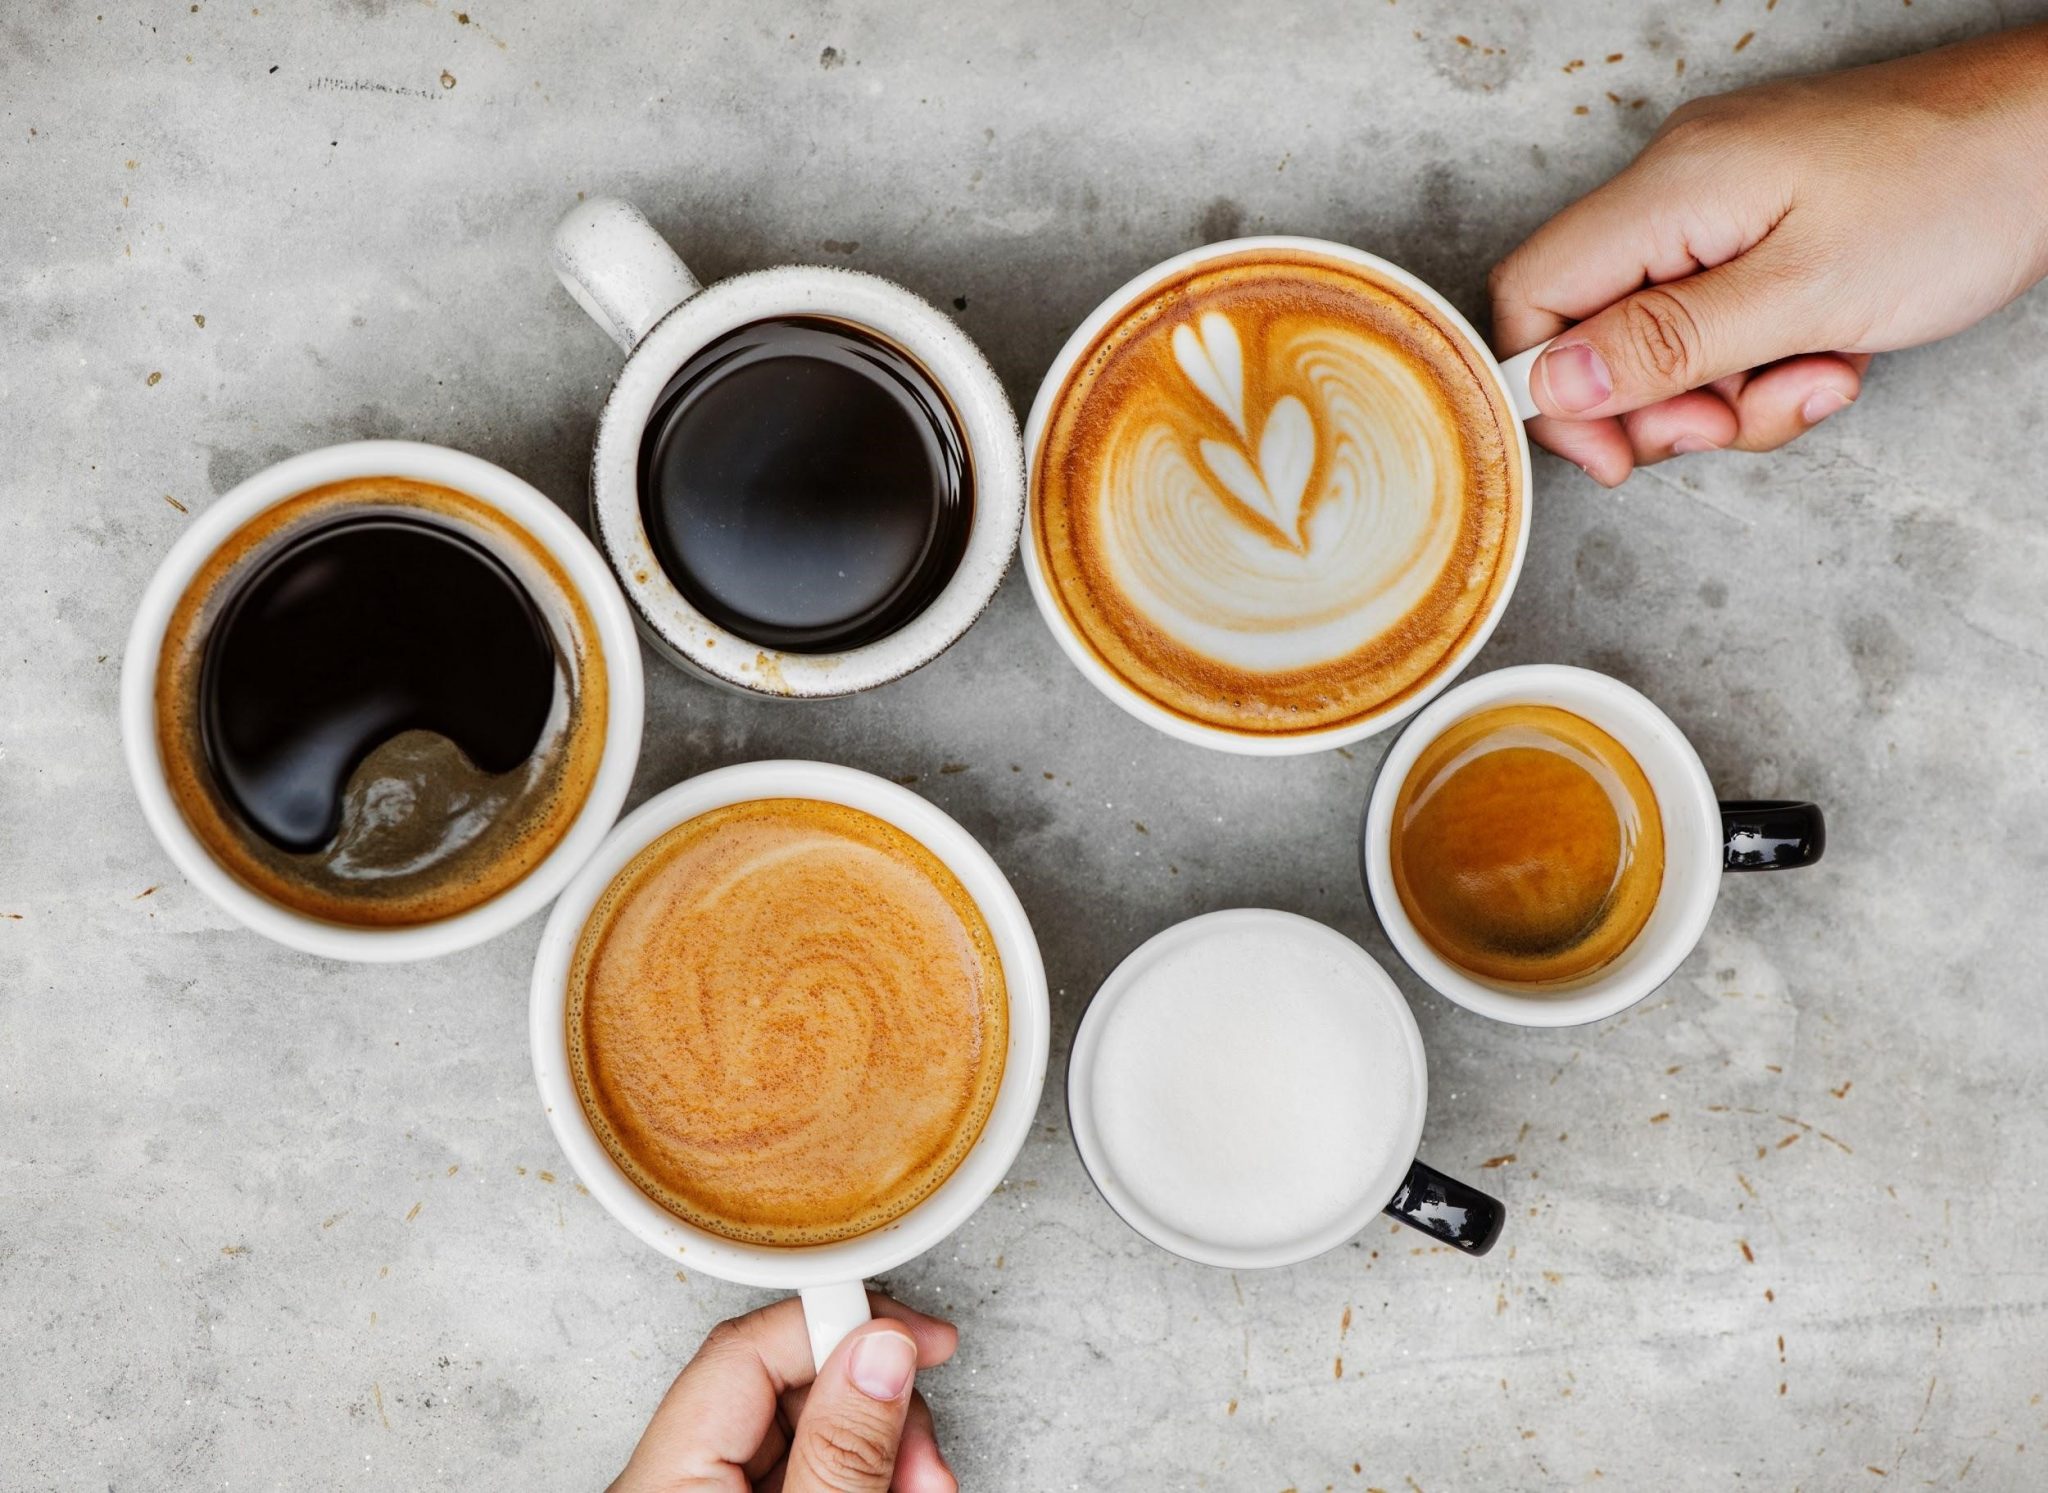 How Your Coffee Cup Makes Your Coffee Taste Better